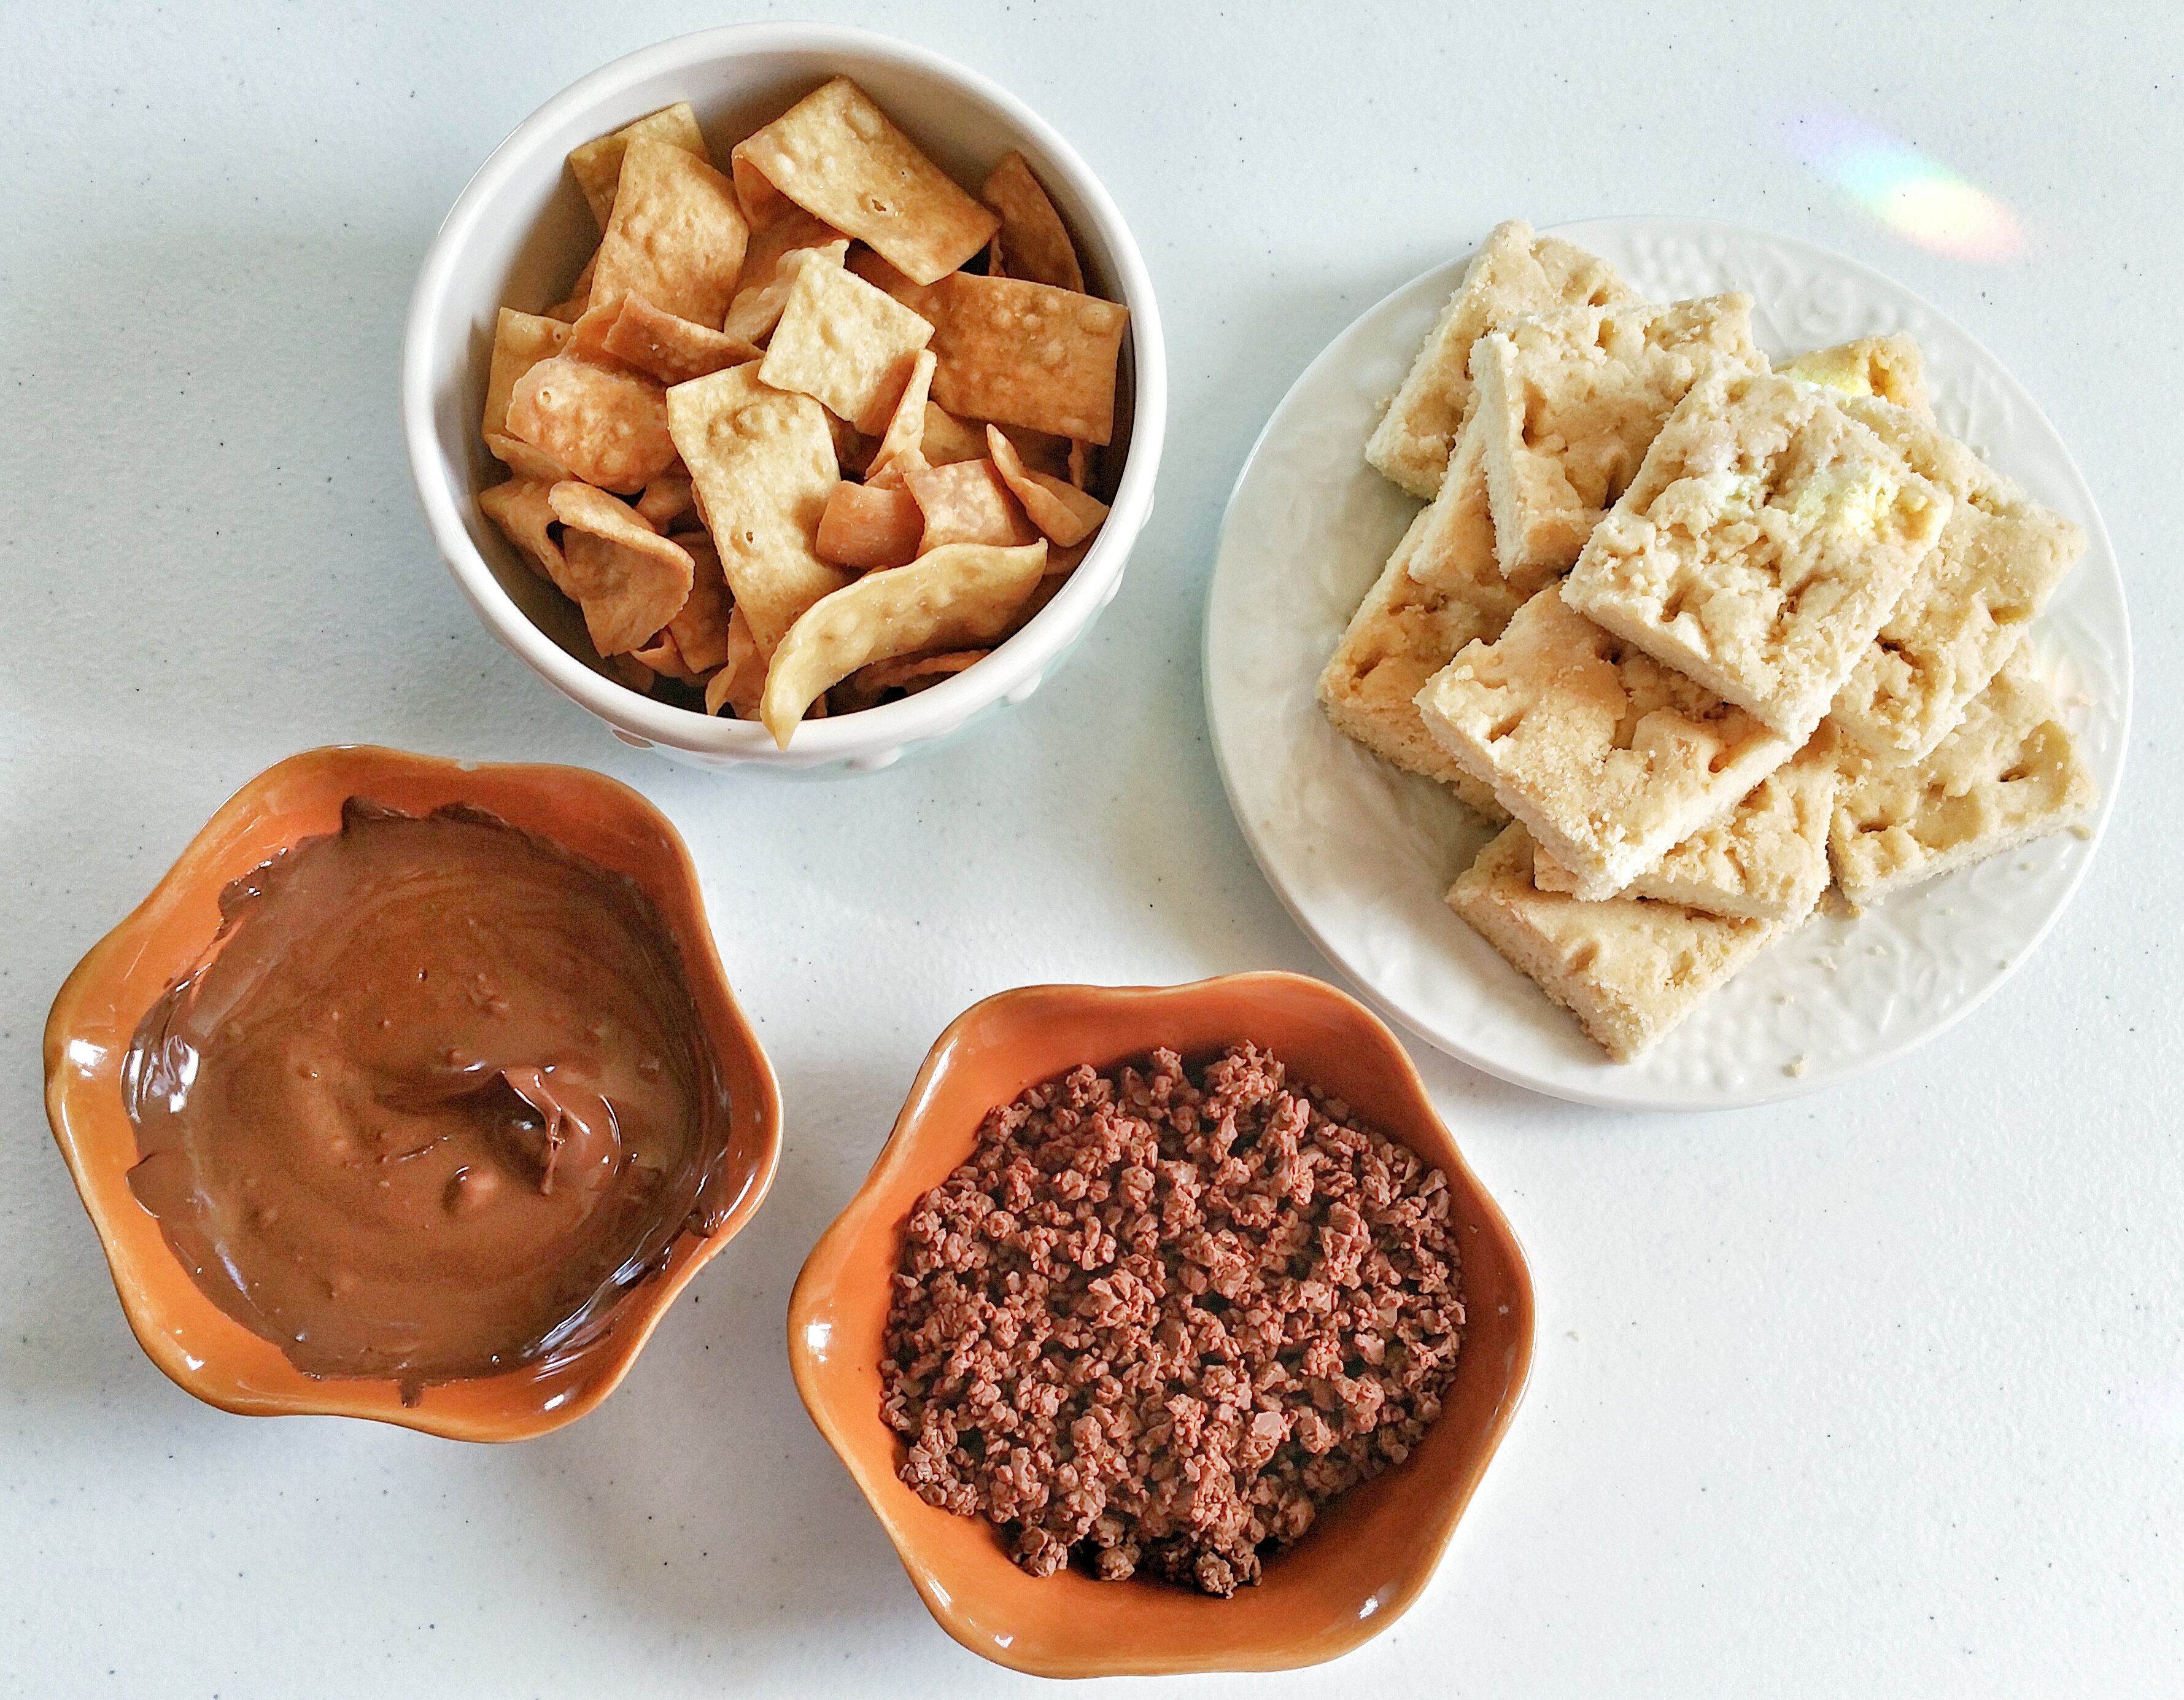 recipe, hershey's, chocolate dipped shortbread cookies, chocolate dipped wonton chips, food, family, happy moments, summer solstice, Hershey's chocolate, Hershey's kisses, easy recipe, dessert, snack, 